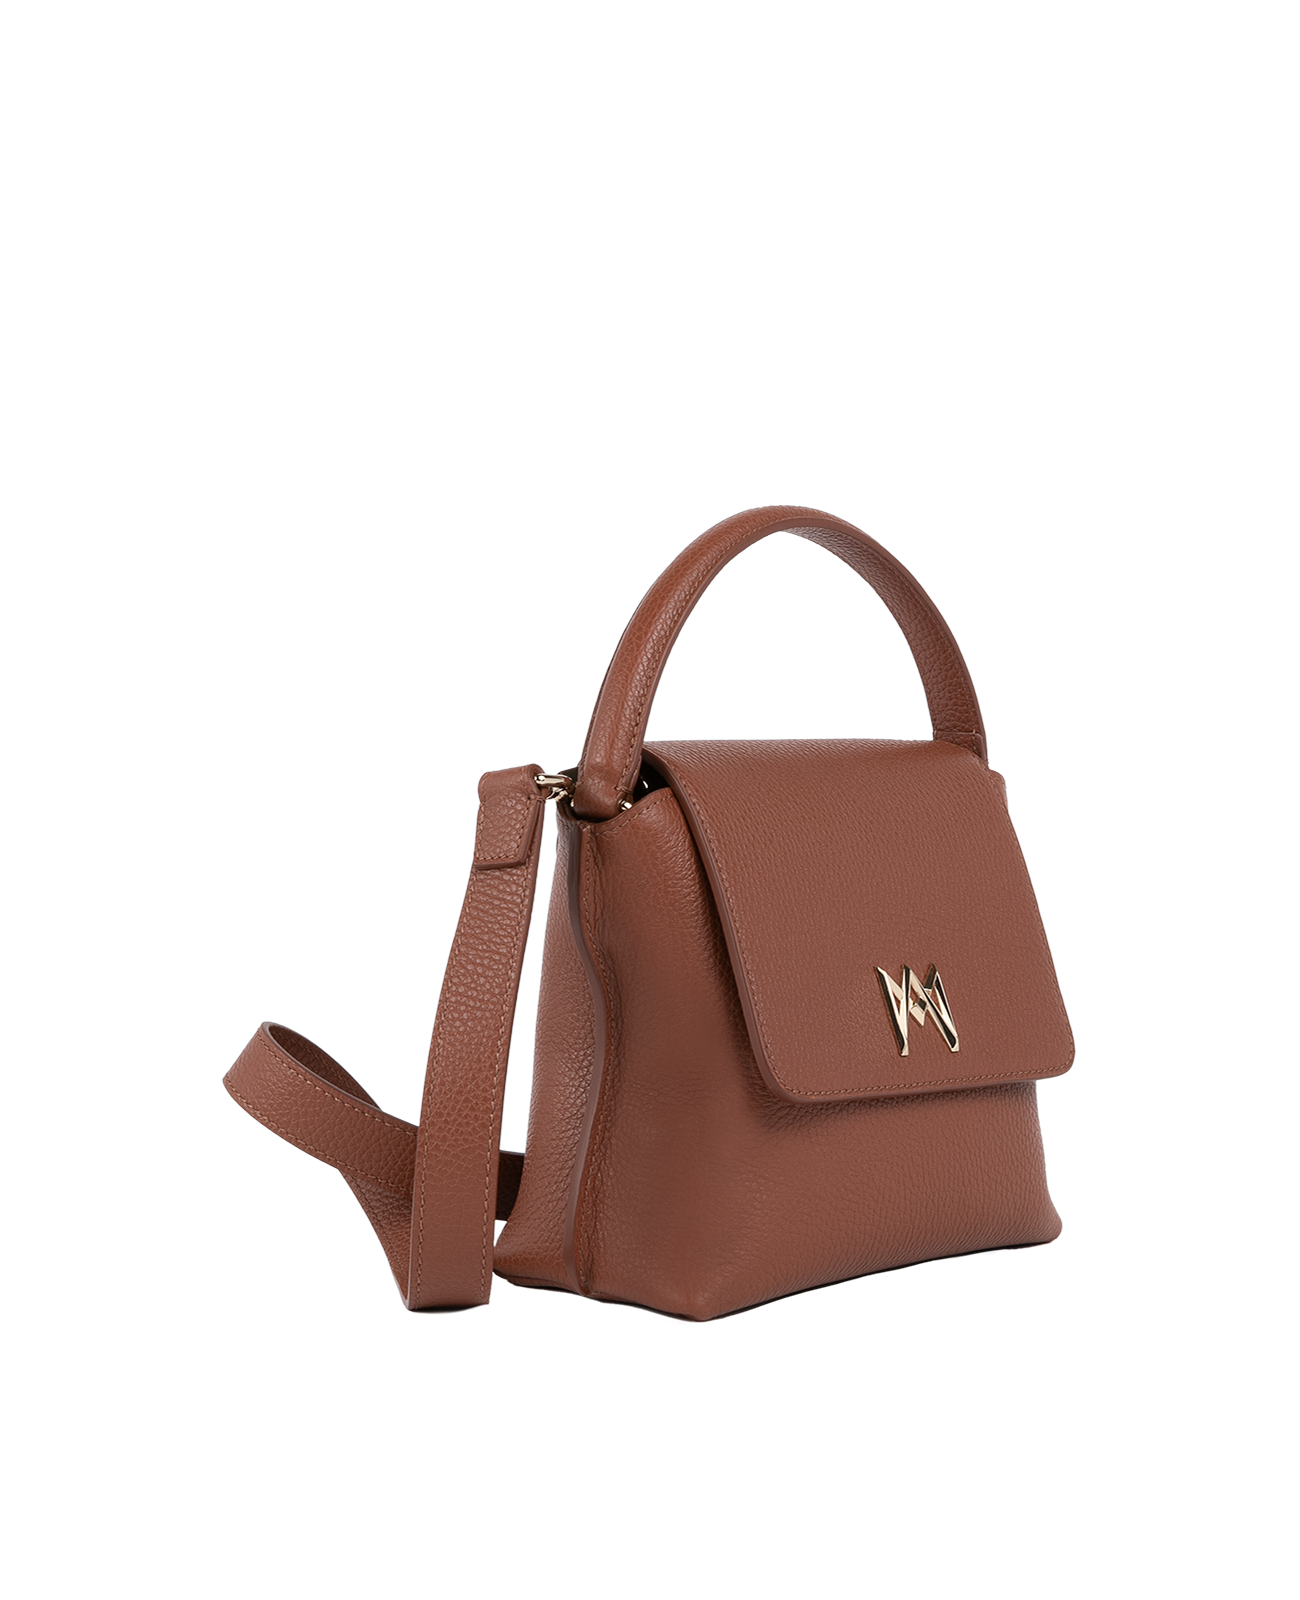 Cross-body bag in Italian full-grain leather, semi-aniline calf Italian leather with detachable shoulder strap.Three compartments, zip pocket in the back compartment. Magnetic flap closure with logo. Color: Dark Brown. Size: Medium.